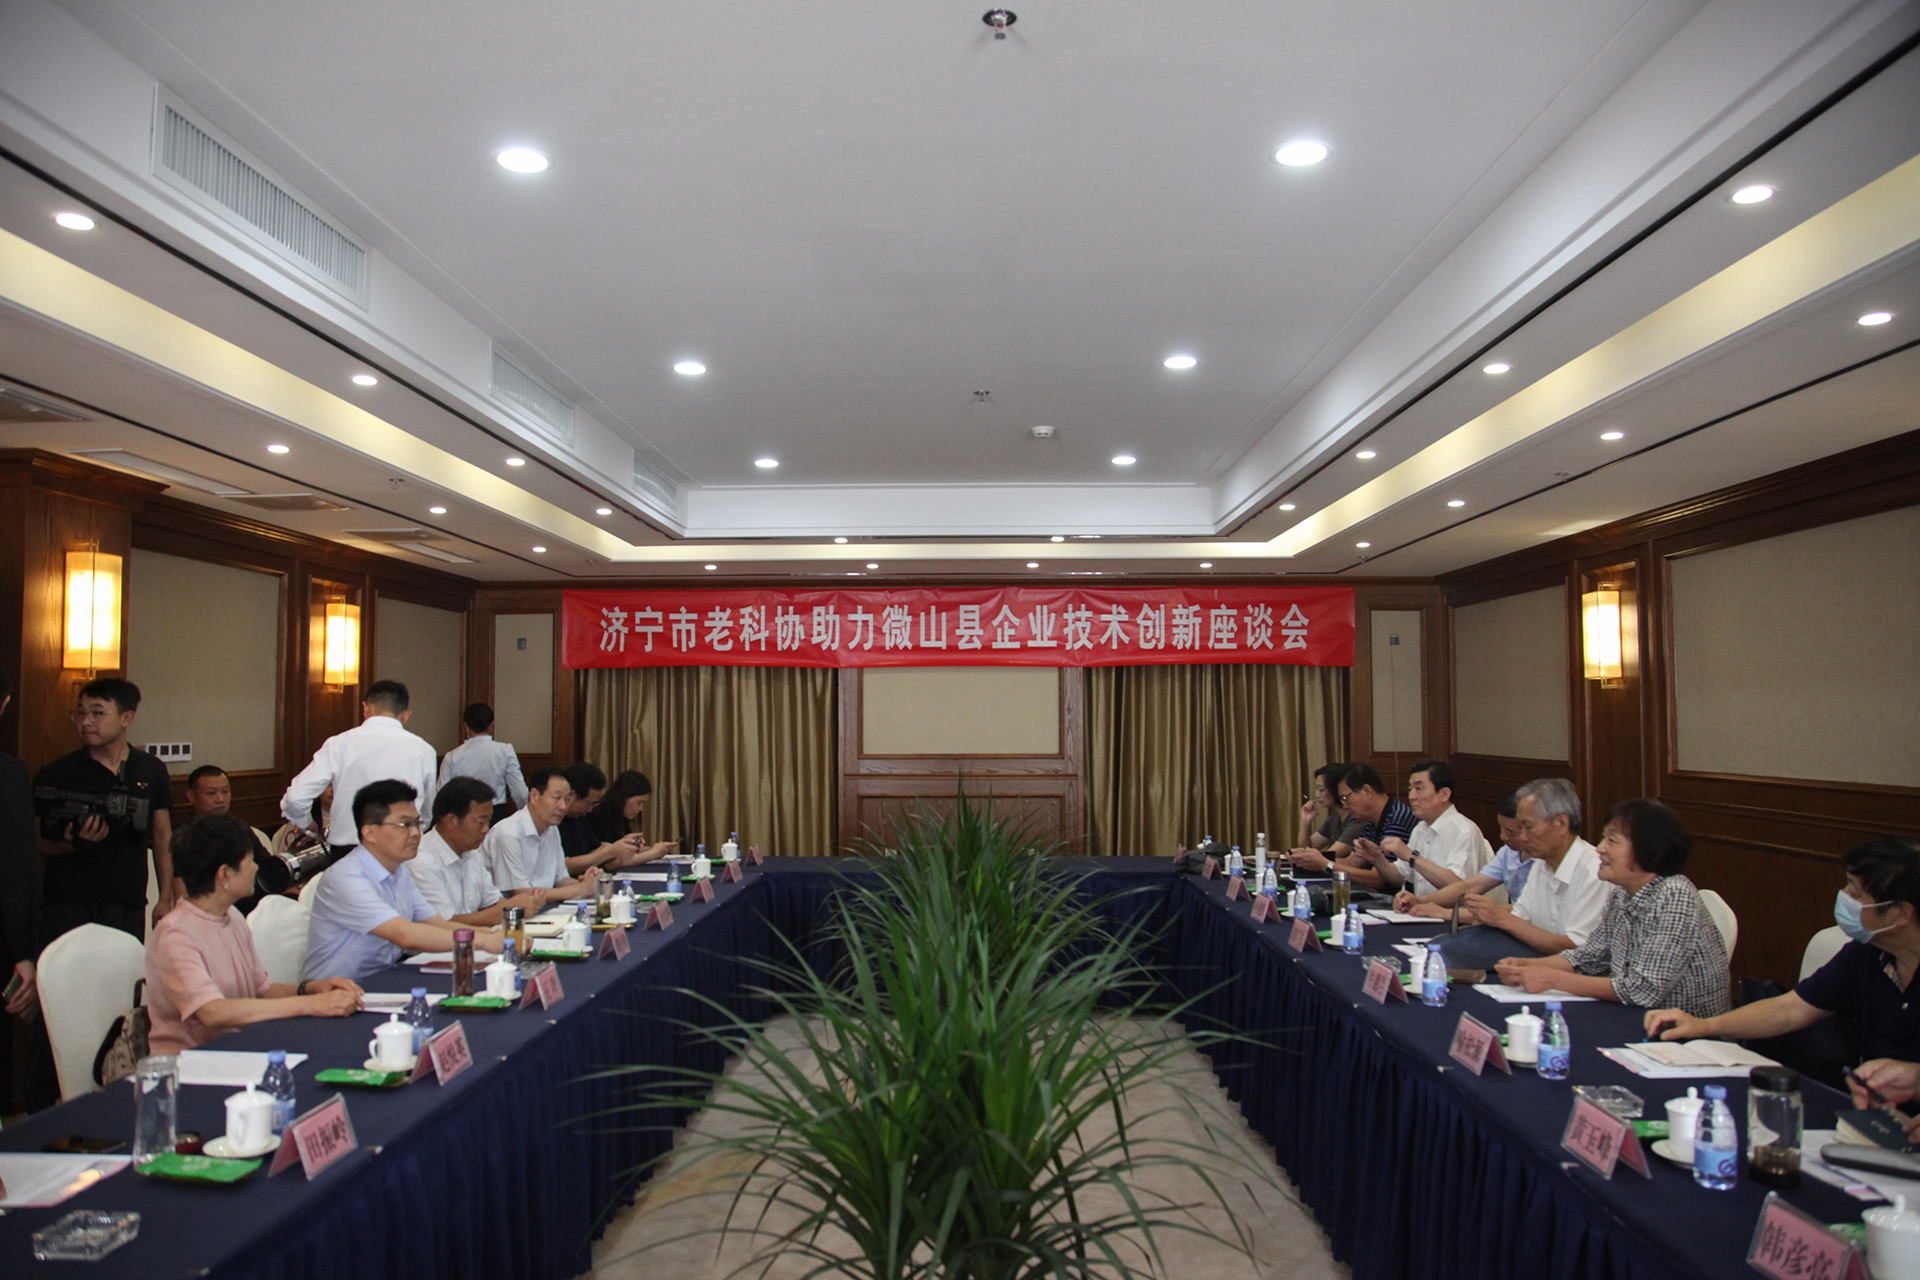 China Coal Group Was Invited To Participate In The Technical Innovation Symposium Of Jining City'S Old Branch To Assist Liweishan County Enterprises